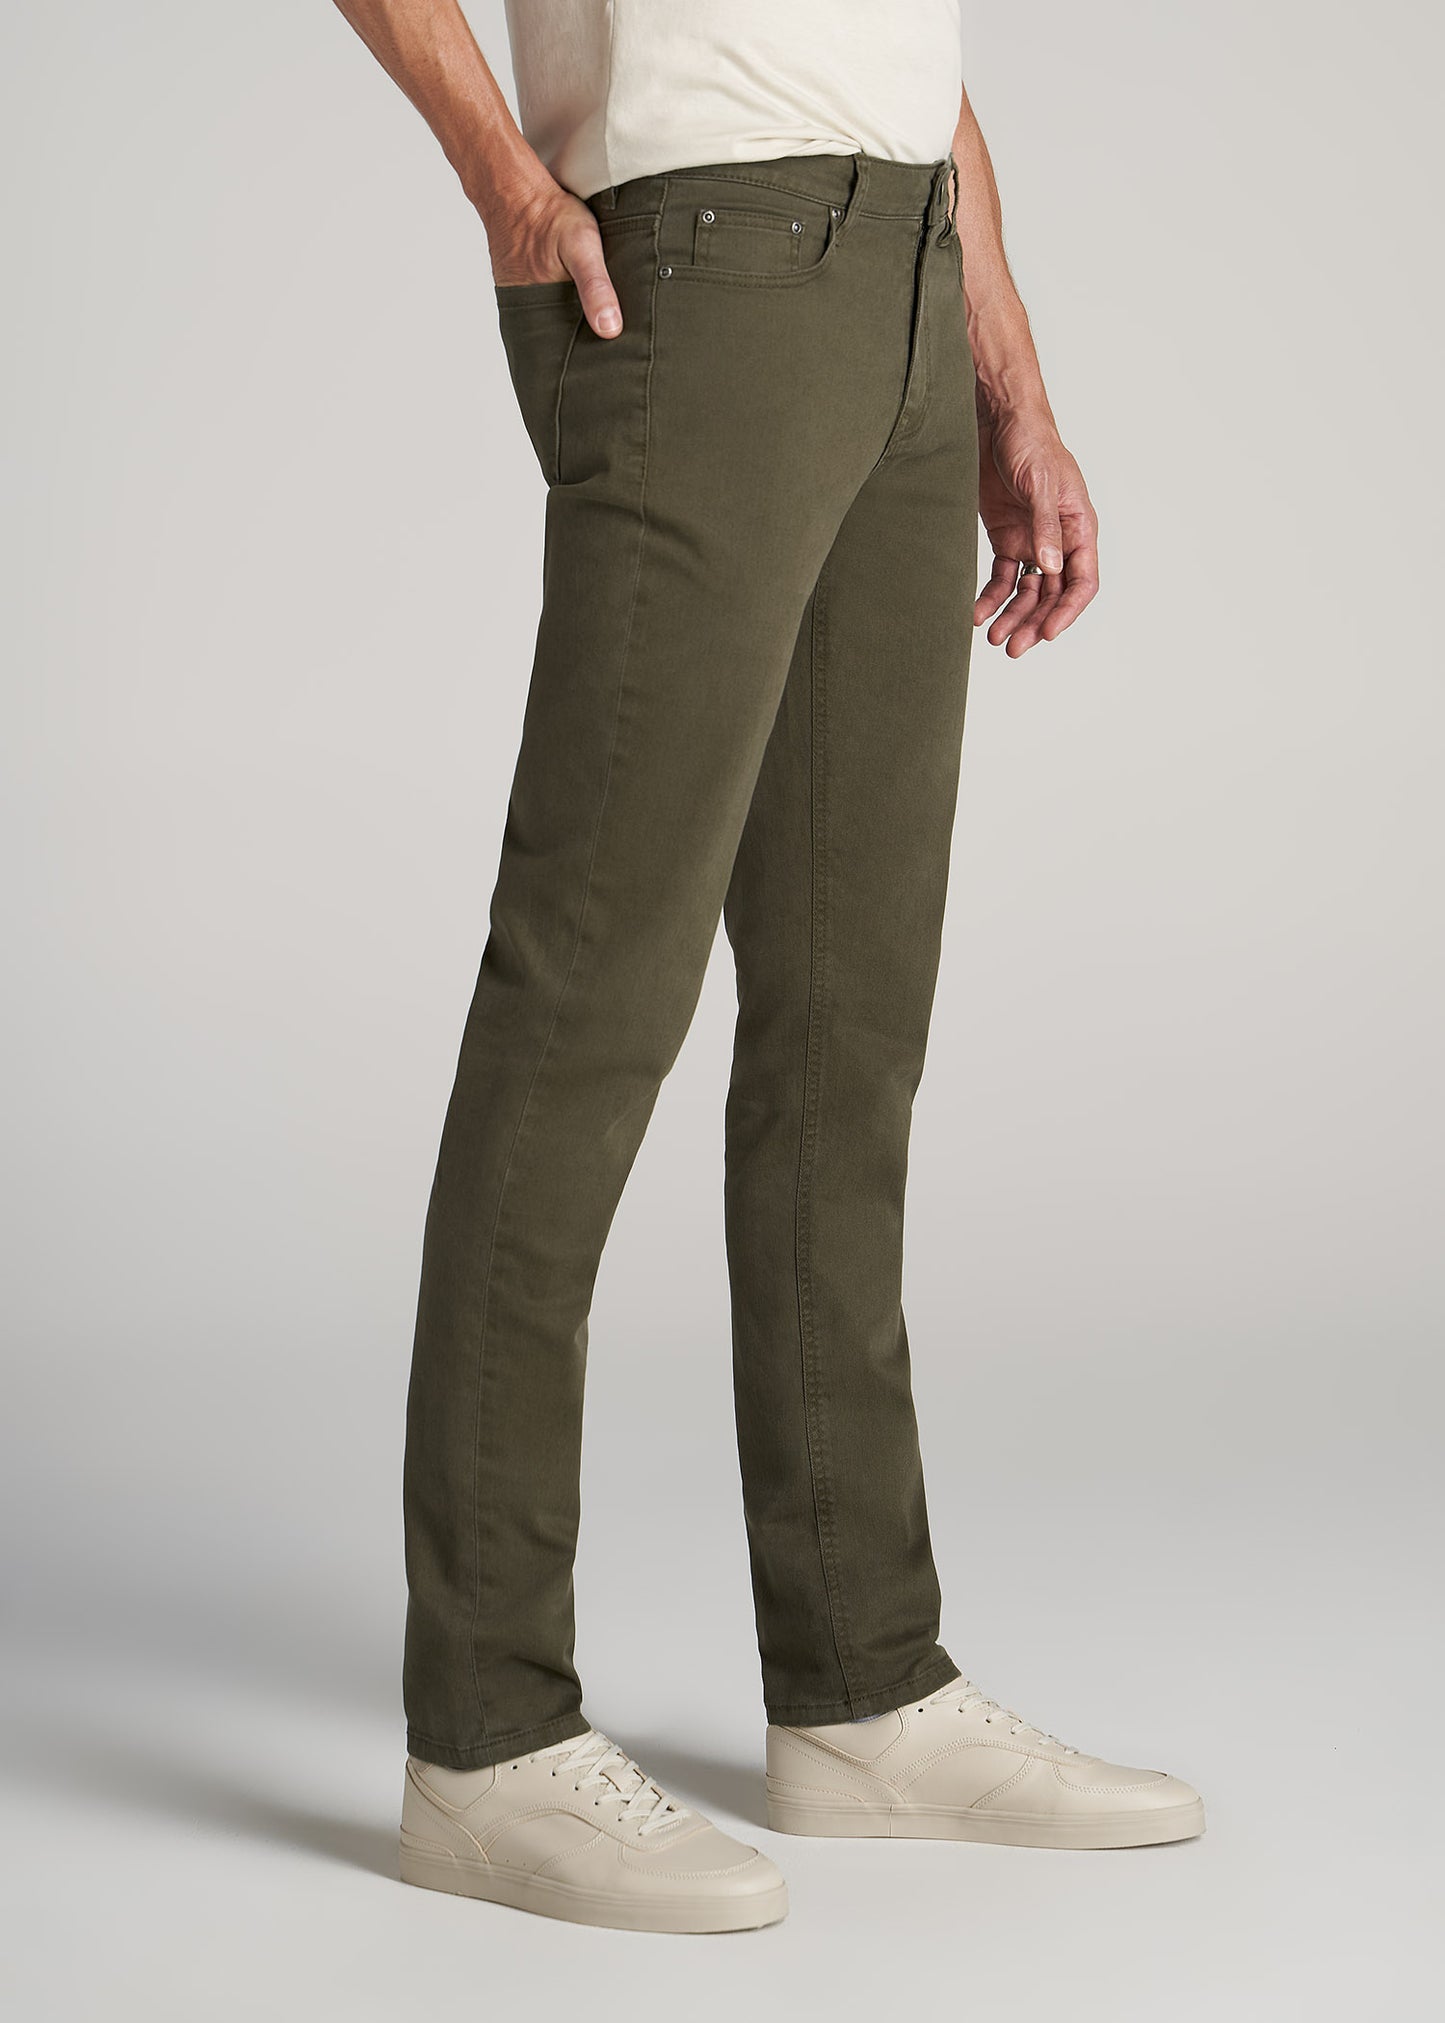 Dylan Slim-Fit Jeans for Tall Men